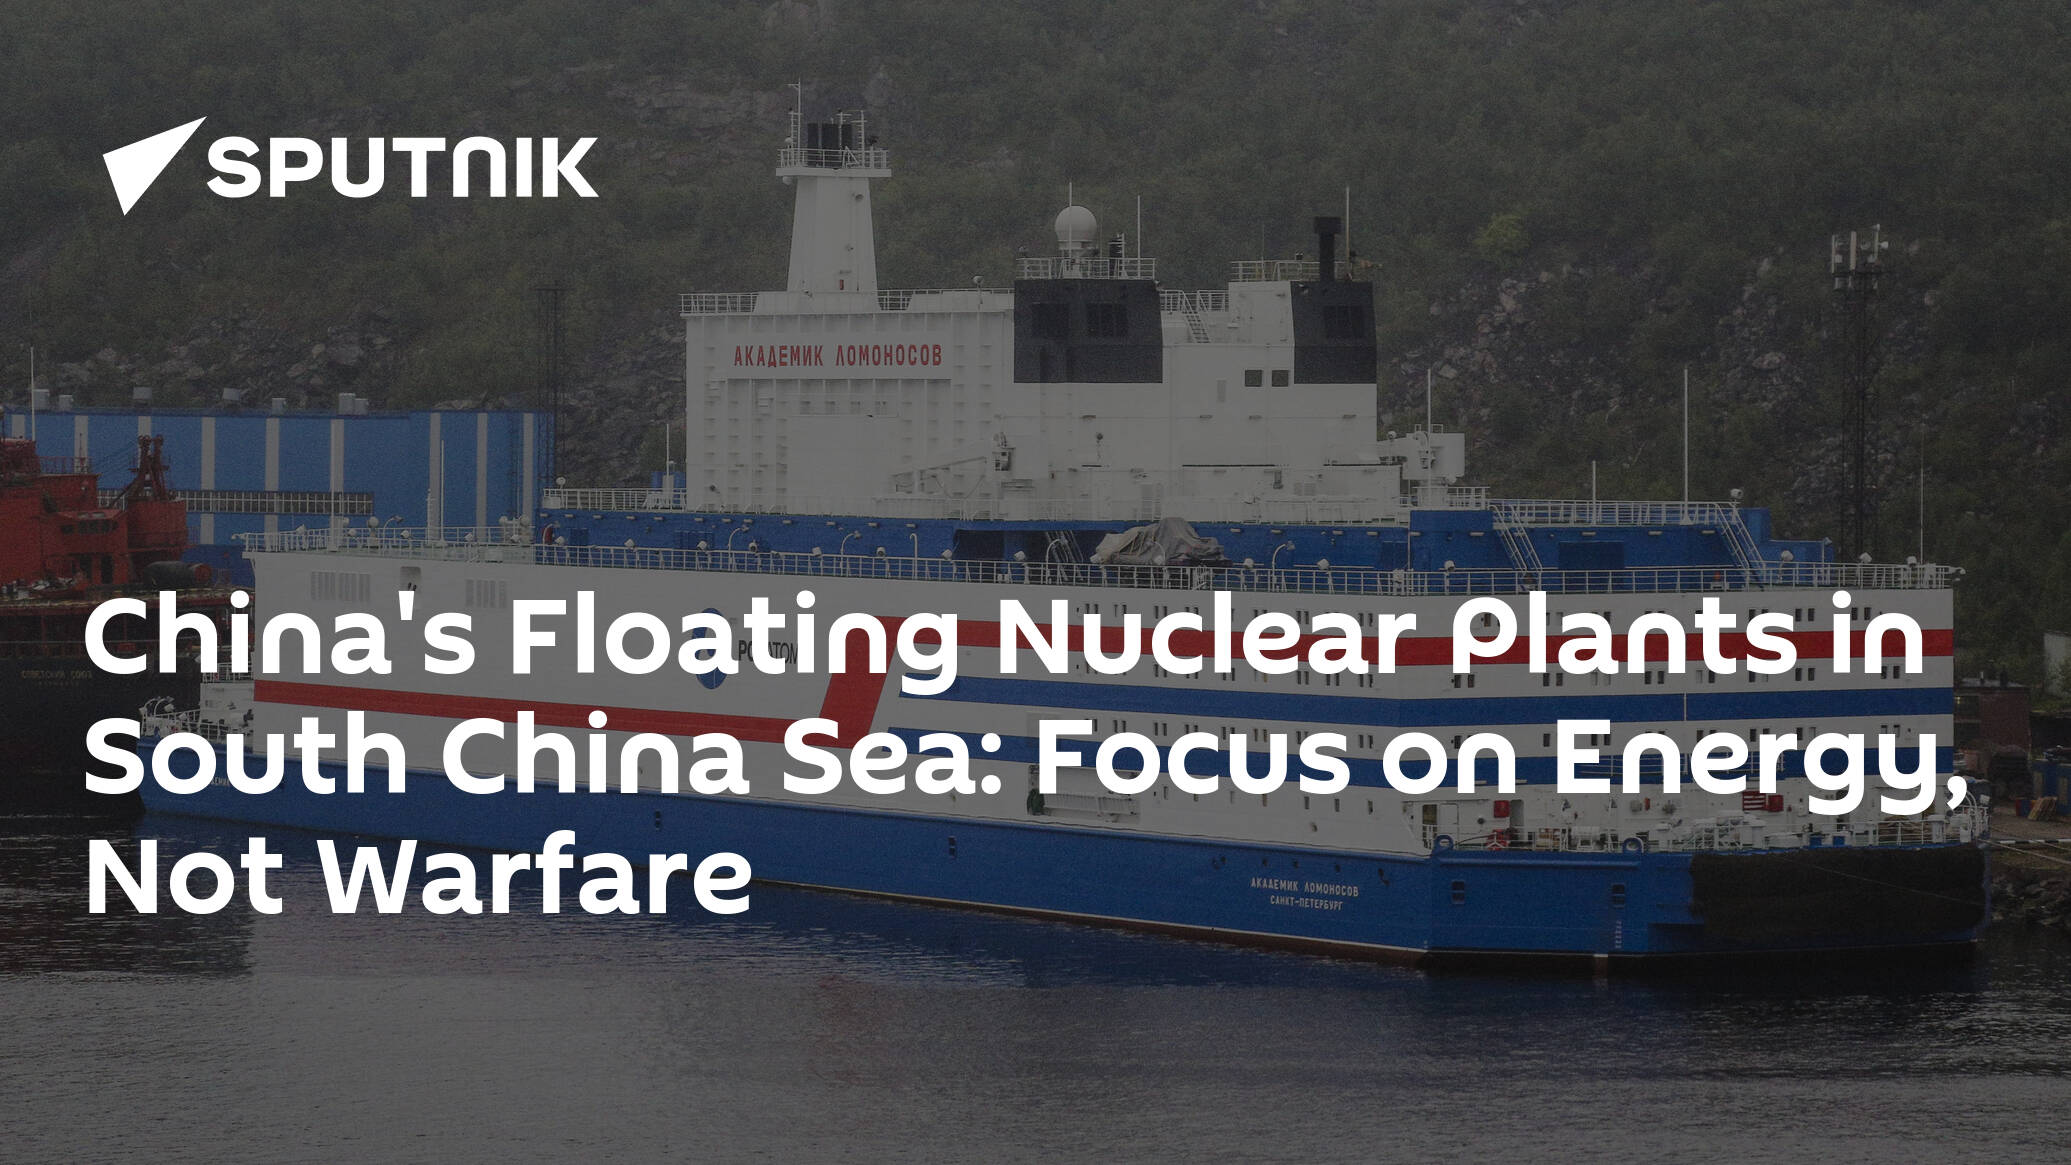 China's Floating Nuclear Plants in South China Sea: Focus on Energy, Not Warfare